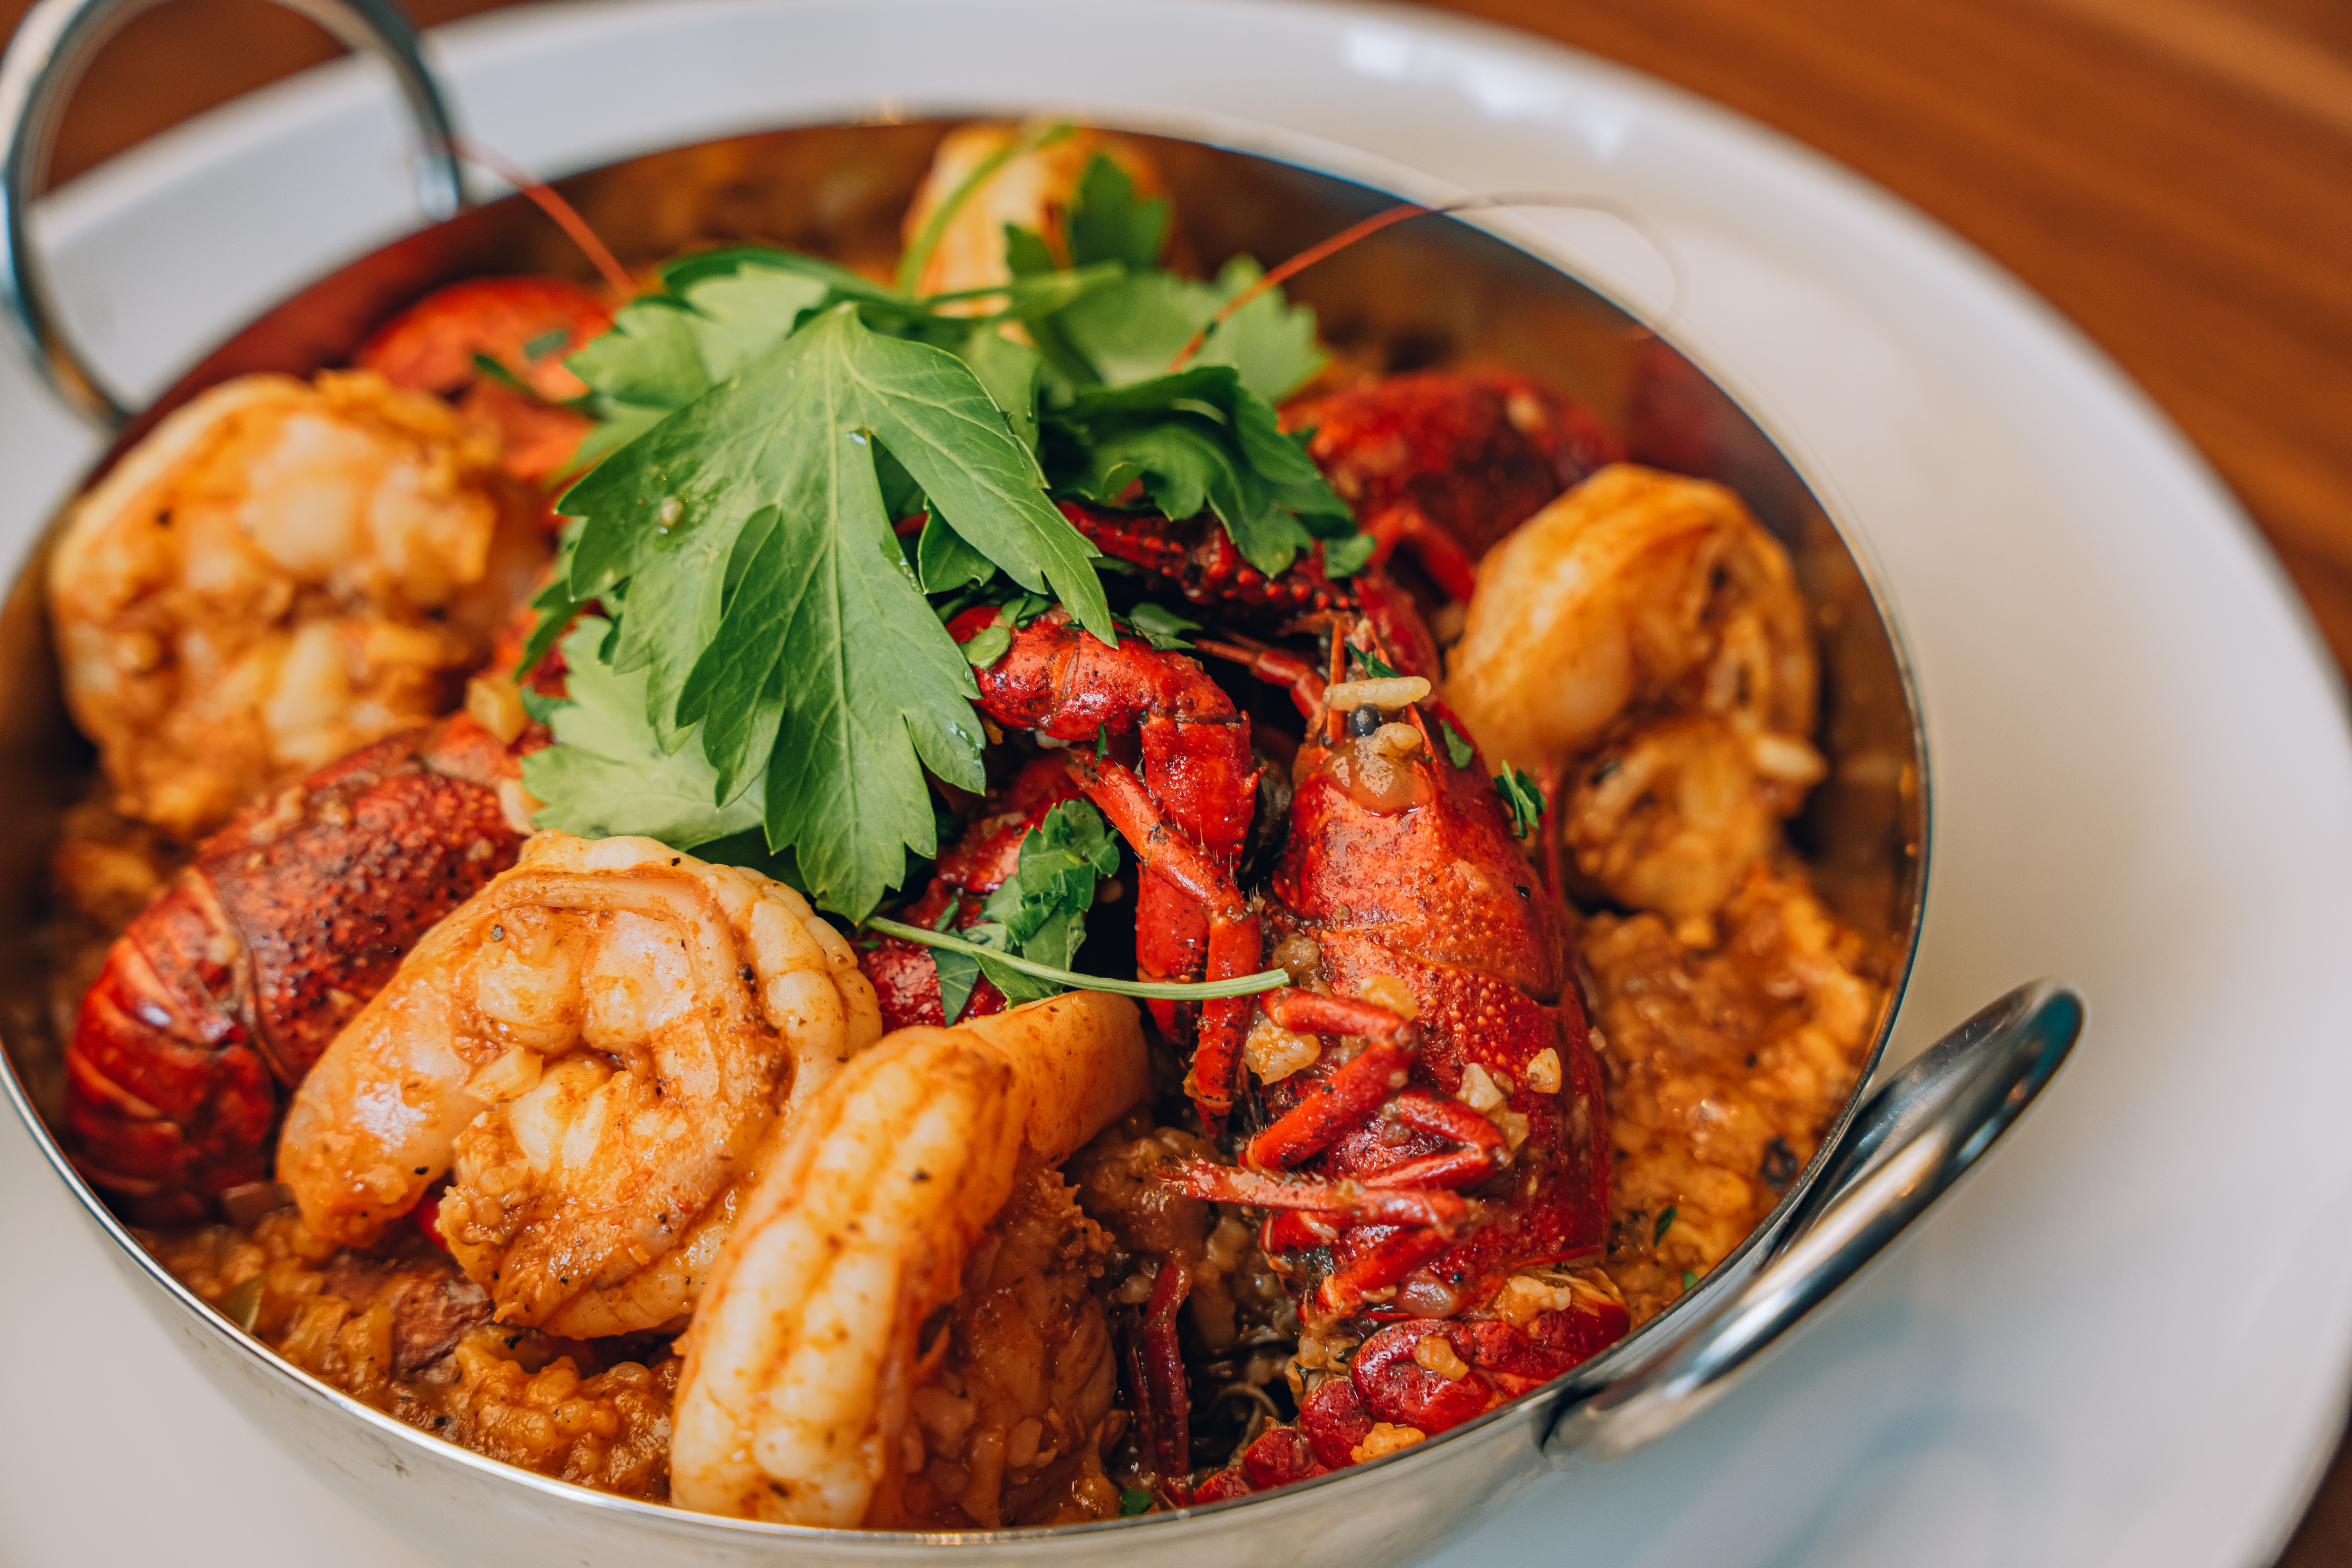 A close-up photo of a bowl of jumbalaya with shrimp, crawfish, peppers, and rice visible.